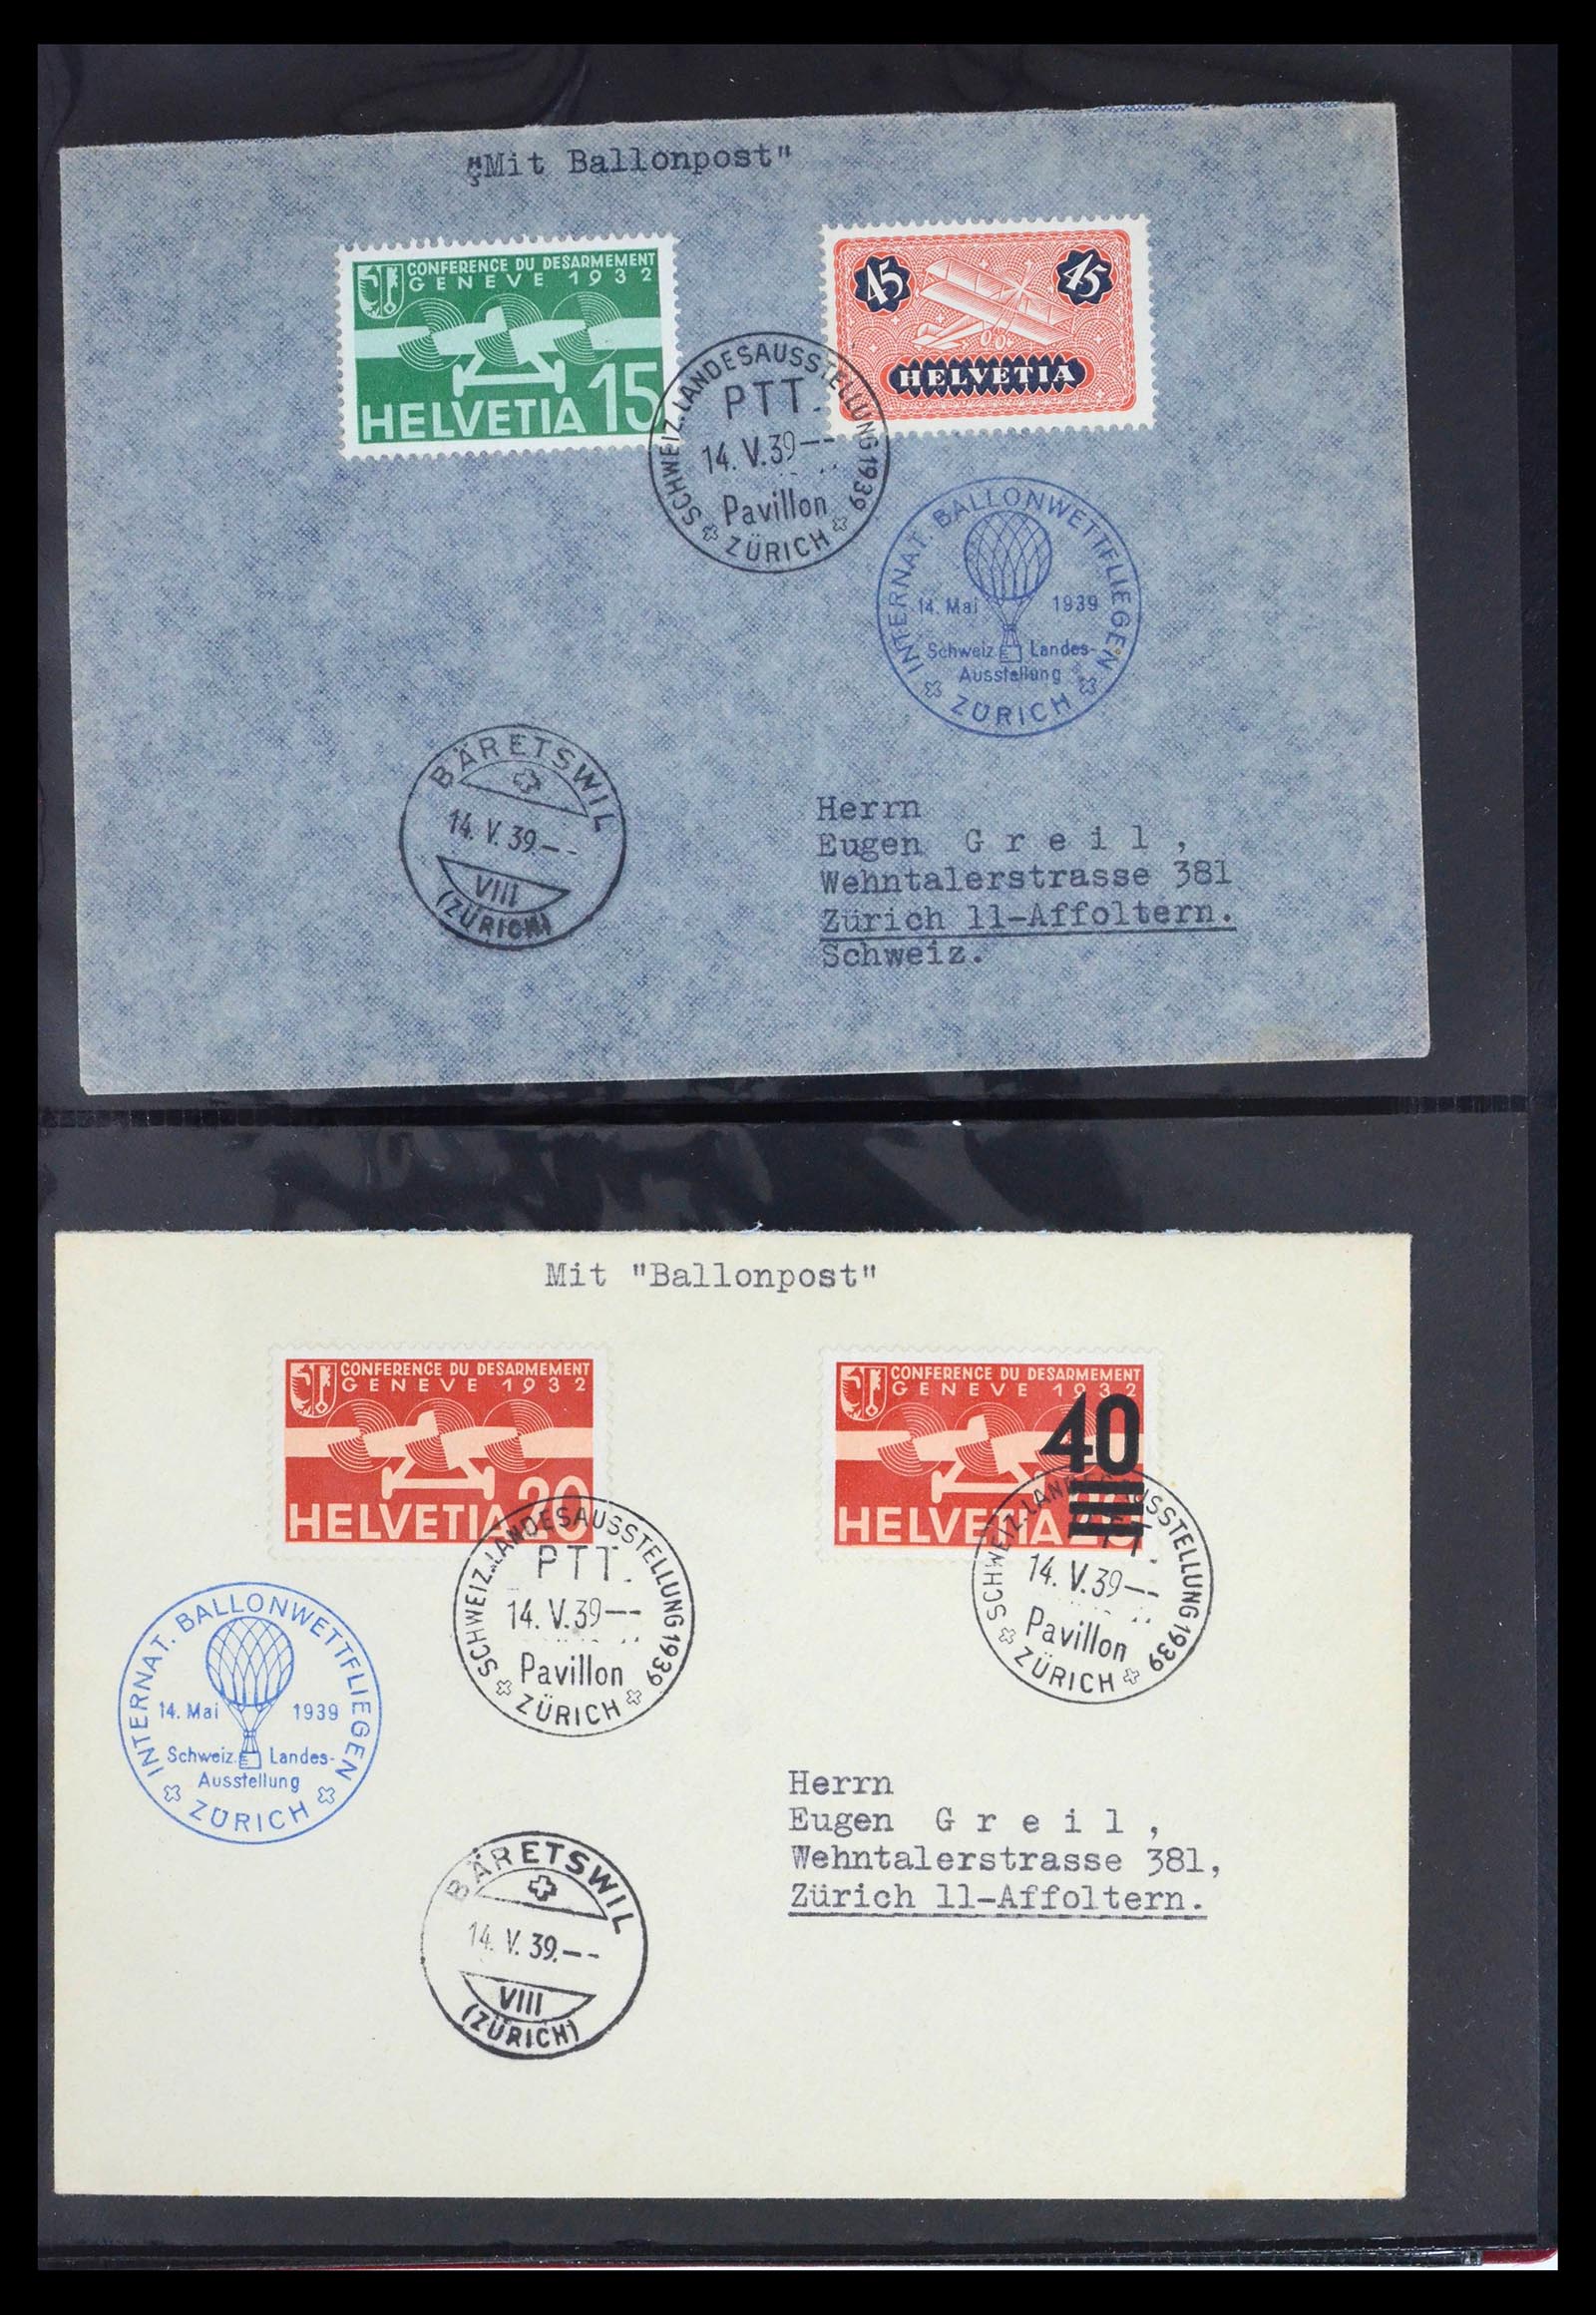 39533 0016 - Stamp collection 39533 Zwitserland airmail covers 1925-1960.